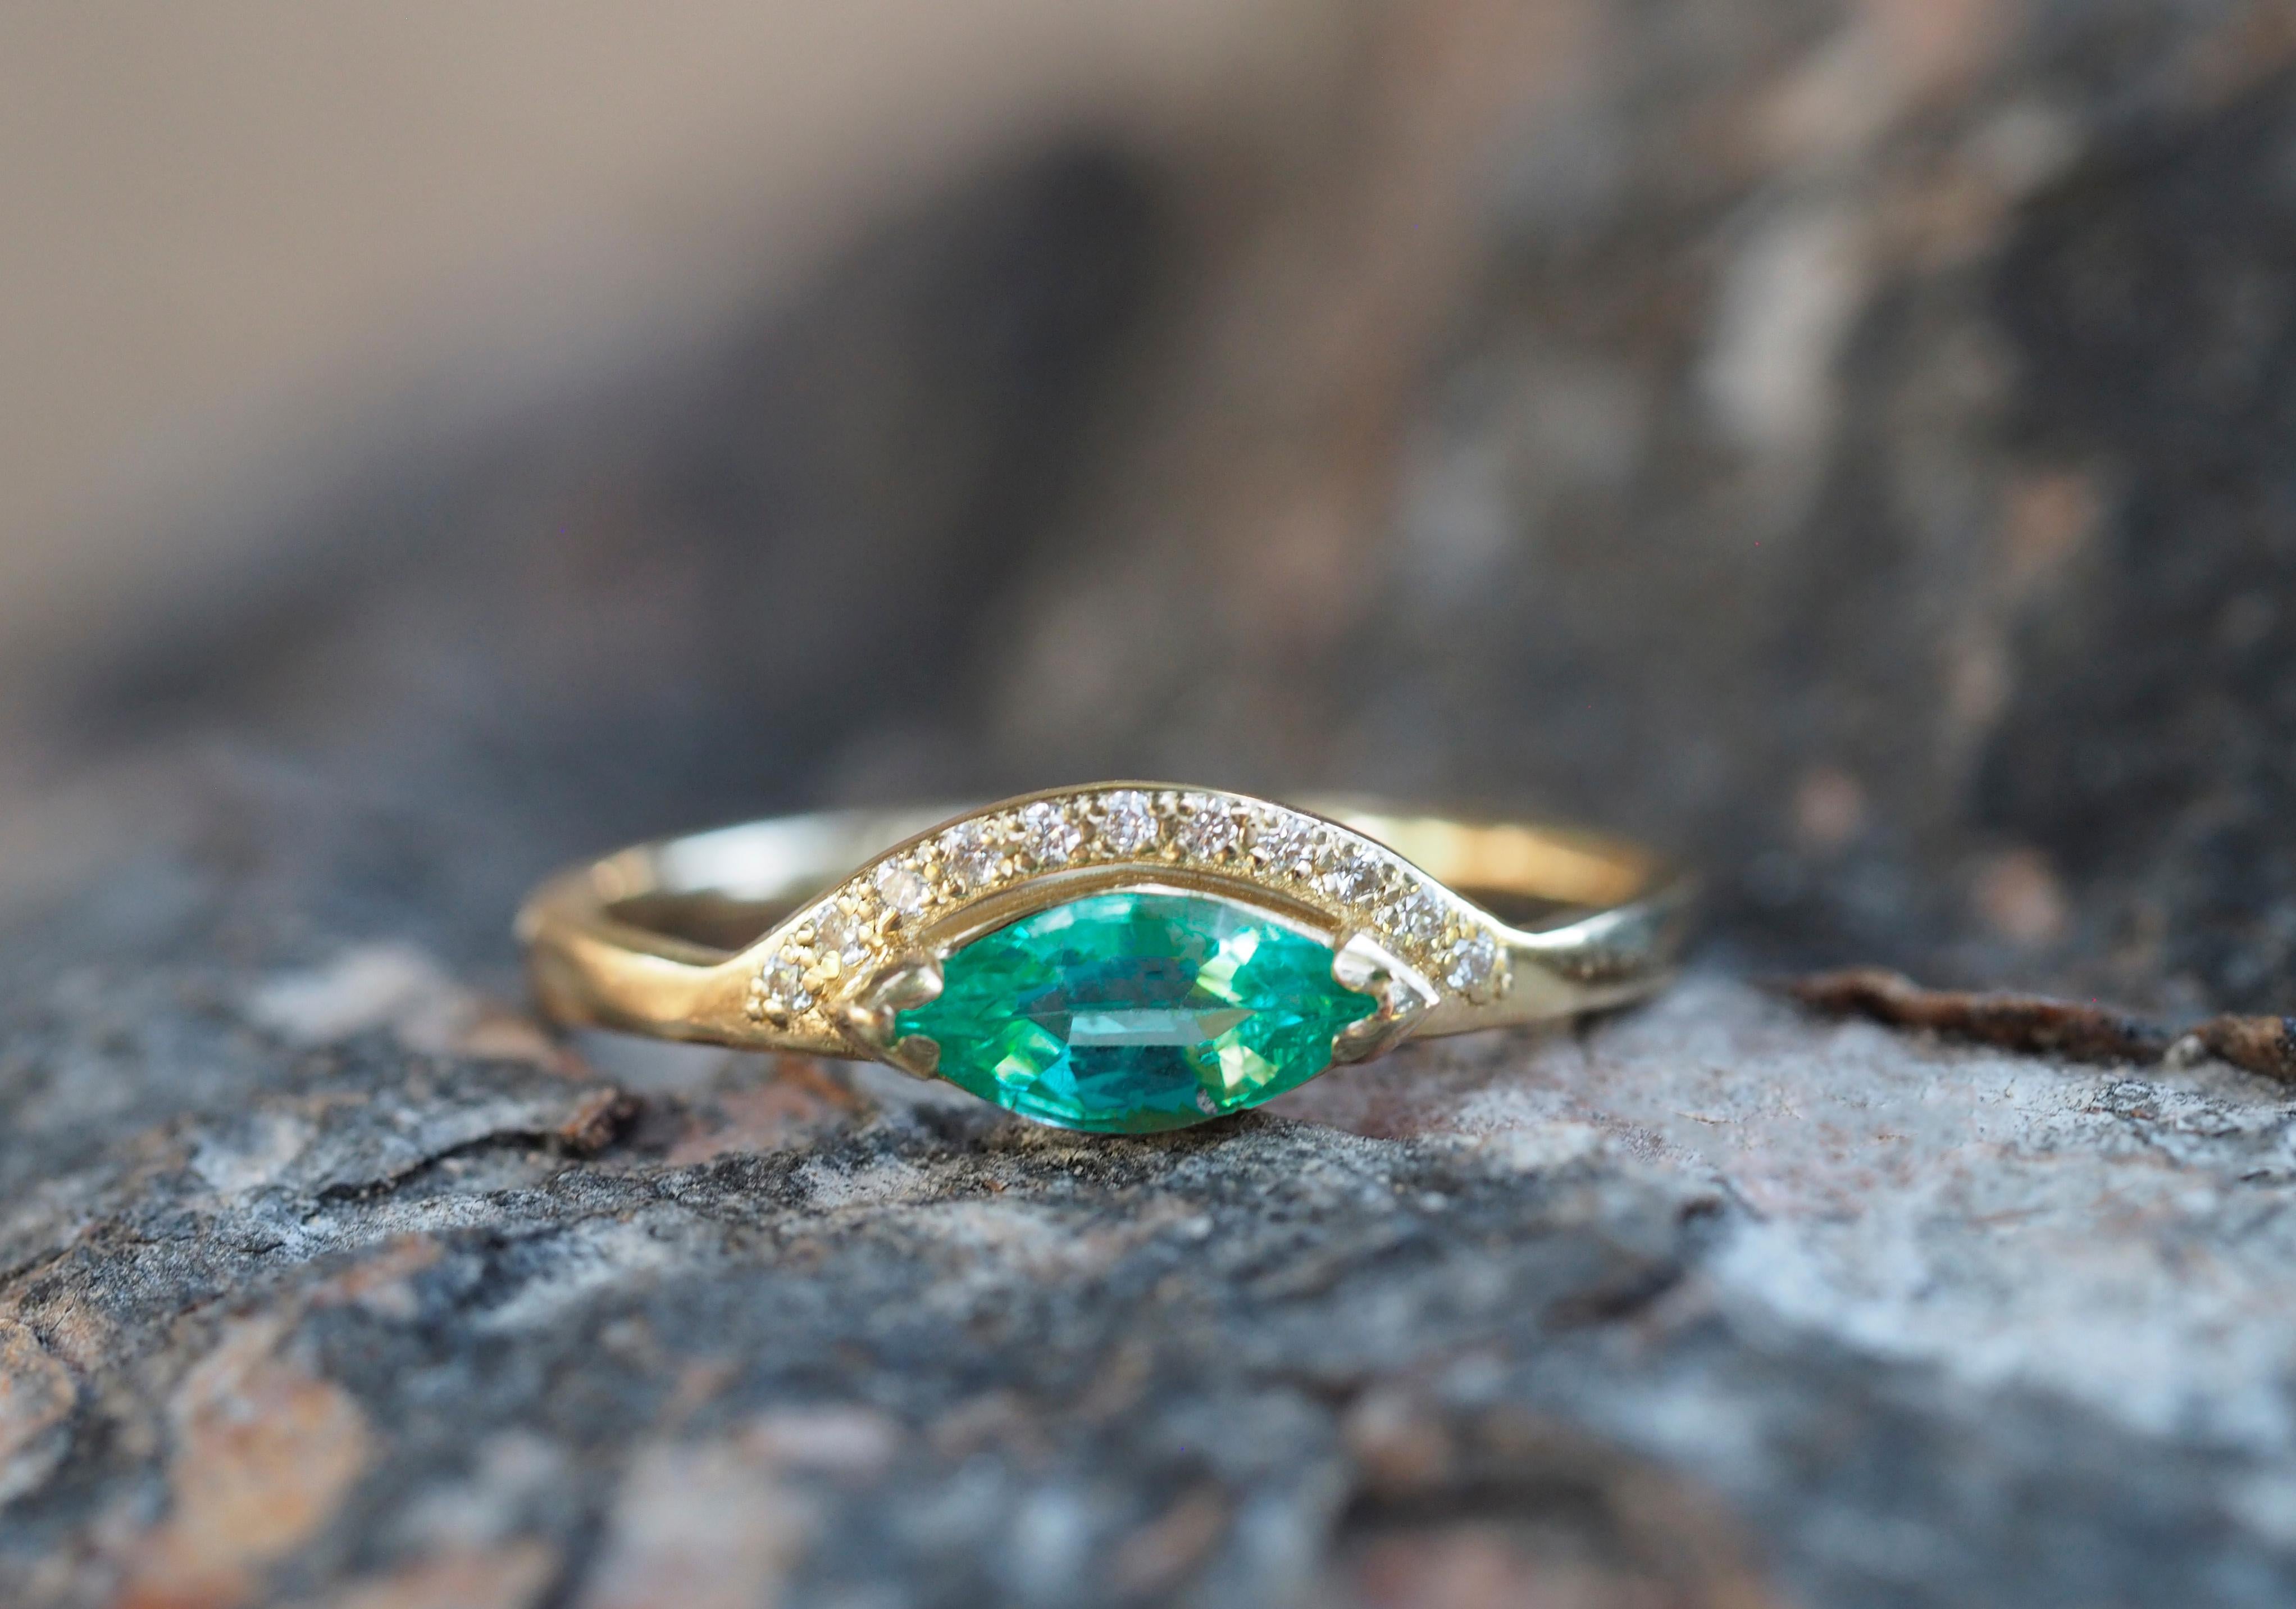 For Sale:  14 K Gold Ring with Marquise Cut Emerald and Diamonds 11